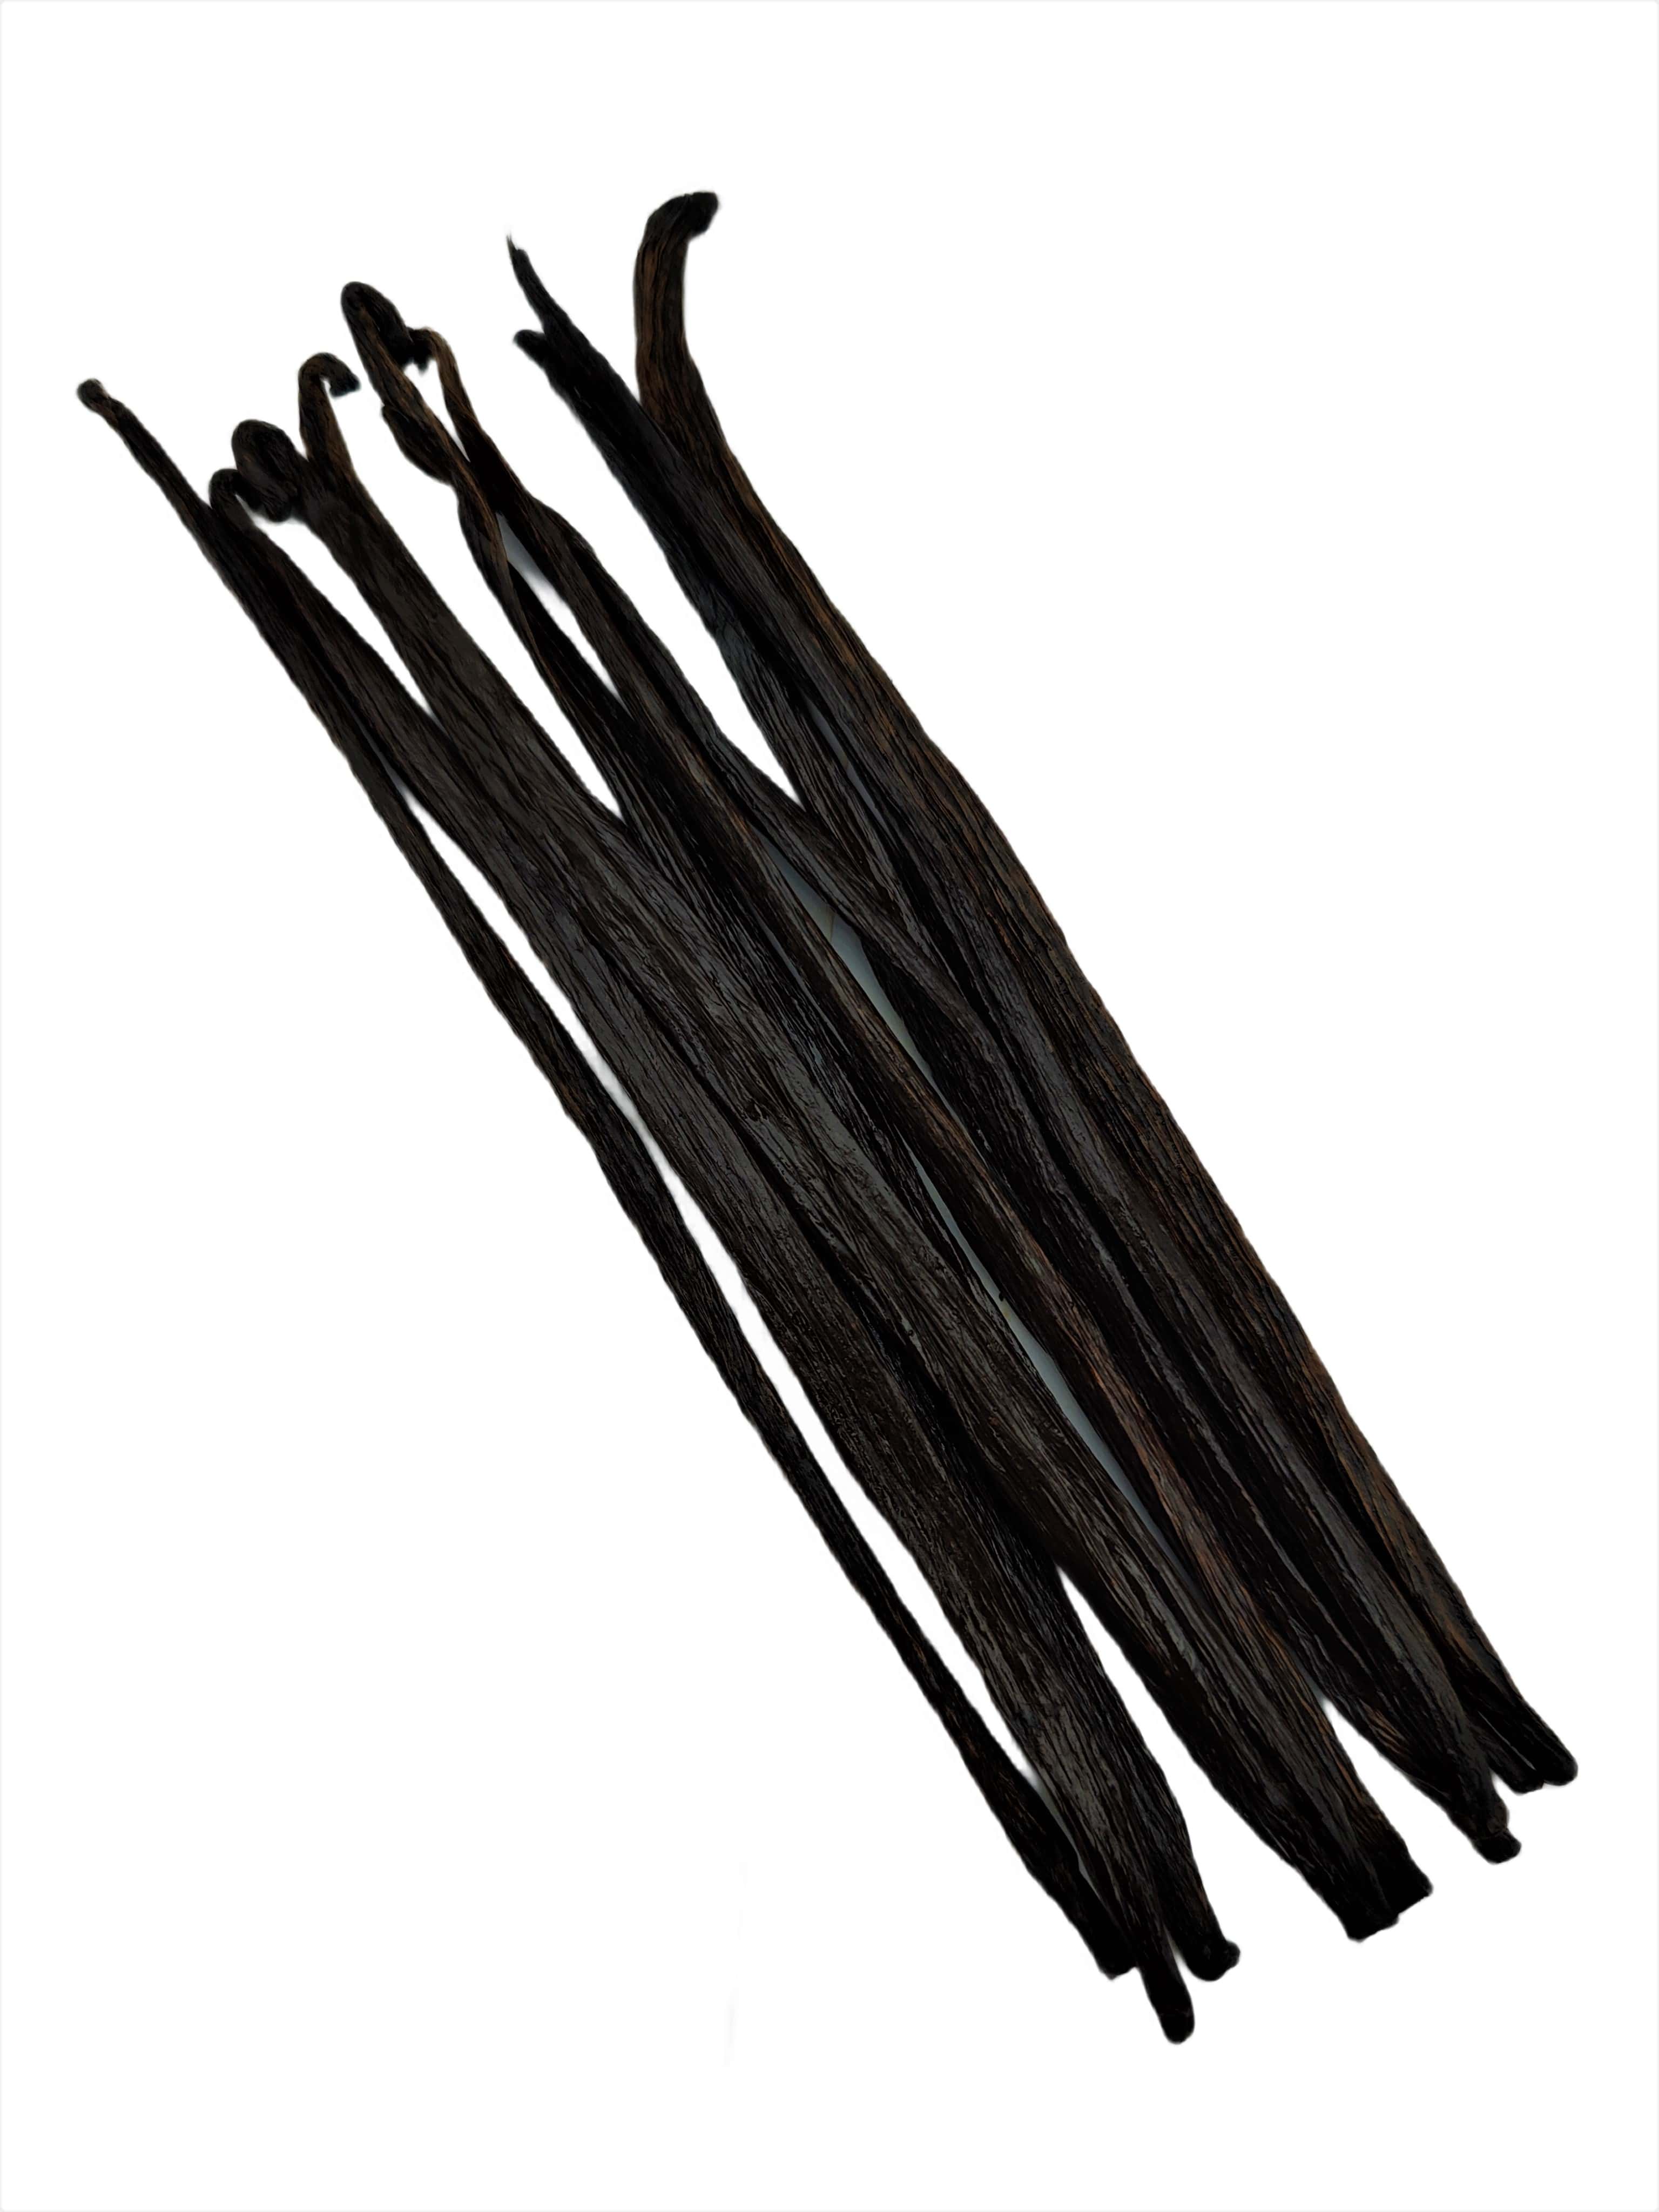 Co-op Pricing Tahitian Extract Grade-B Vanilla Beans  (CAD 11 Per Ounce)<br><br>Minimum Order quantity for this Co-op is 2 ounces